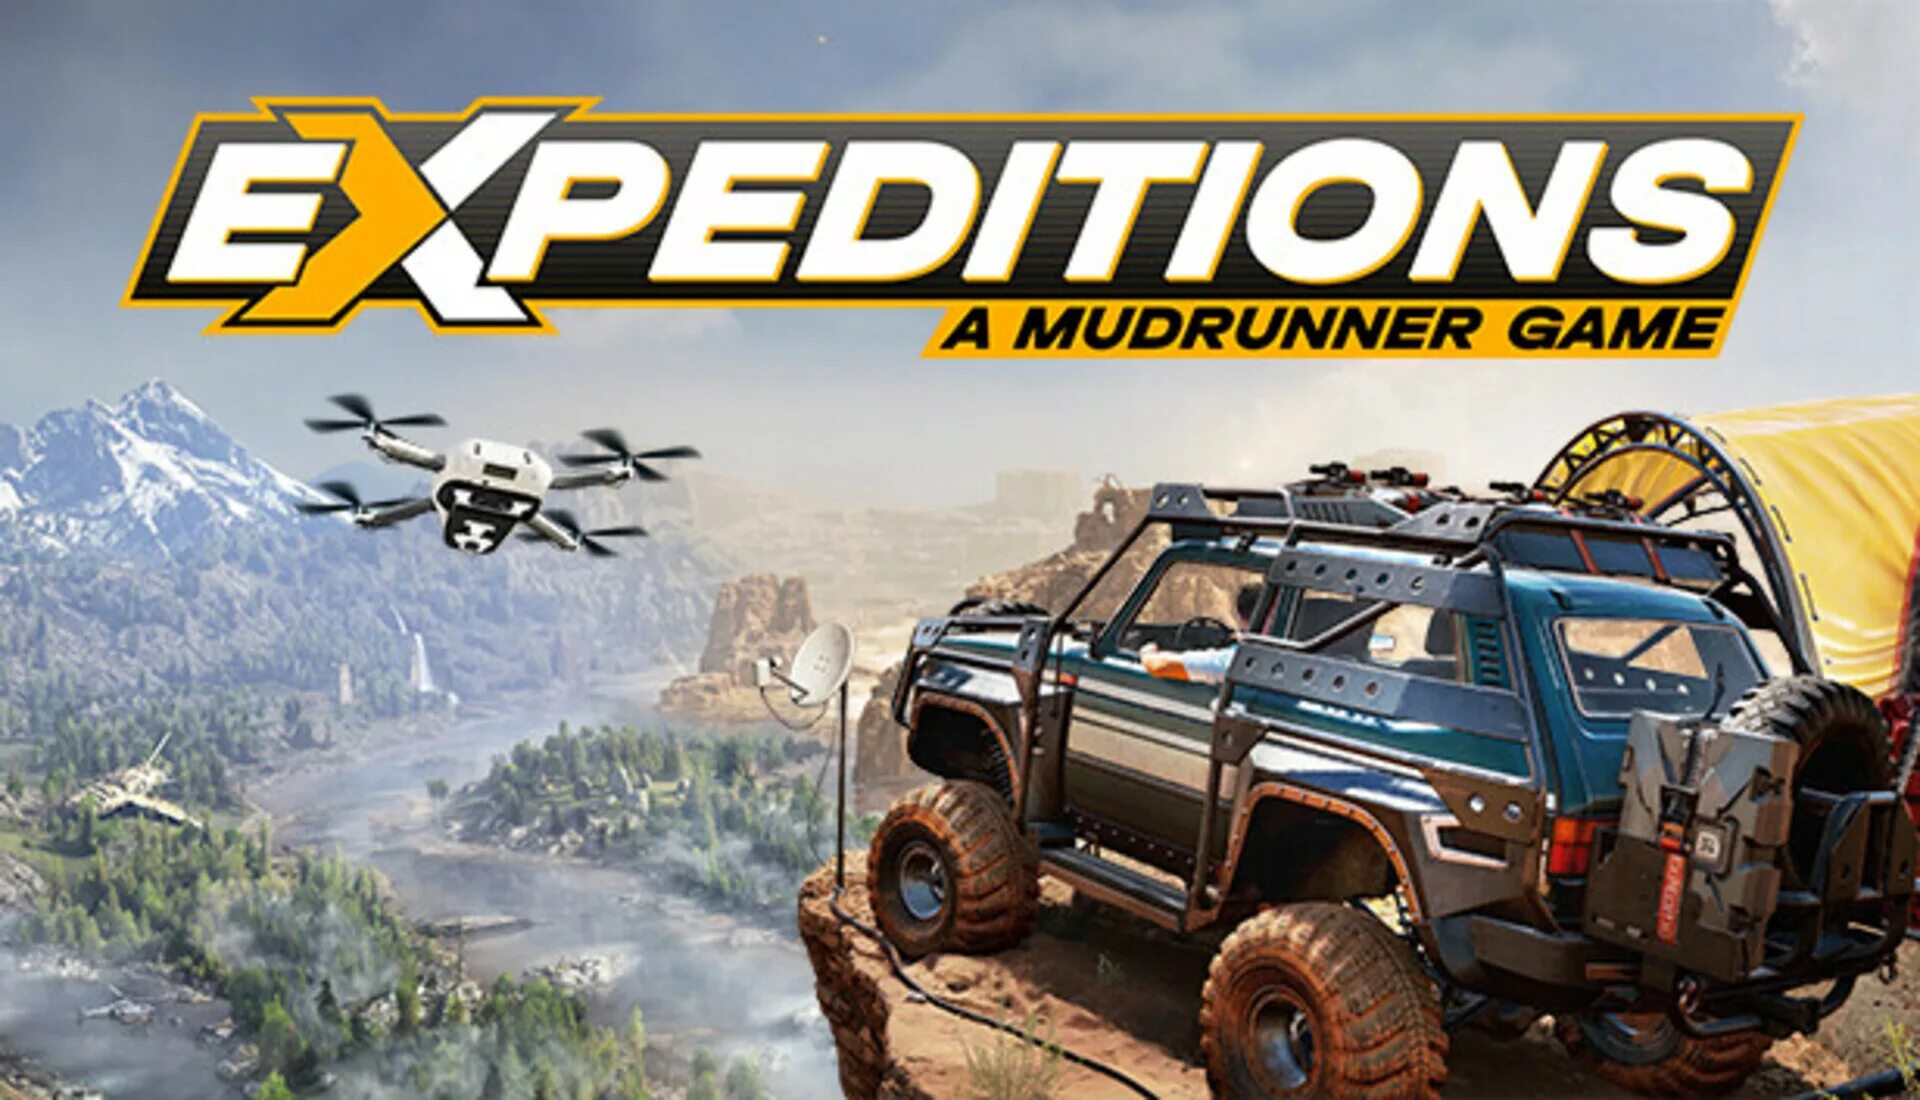 Экспедишн игра. Expeditions: a MUDRUNNER game. AUDSA Expedition.